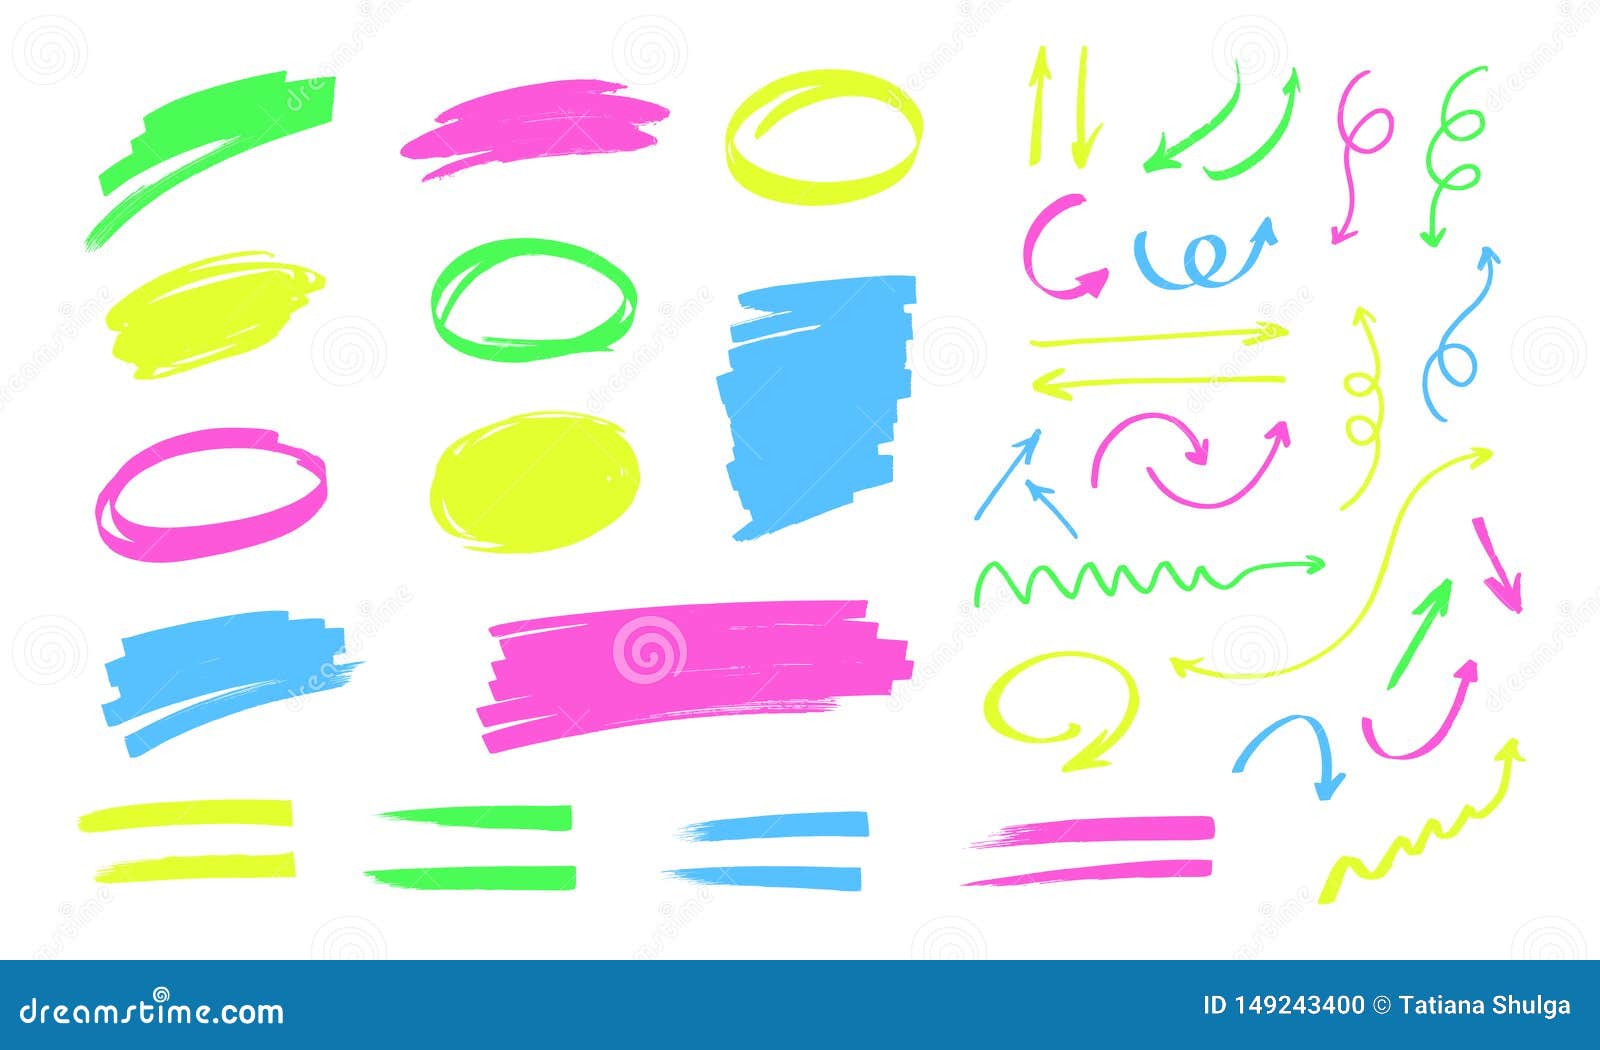 colorful highlighter doodles  on white background. frames for text, lines and arrows drawn with markers.